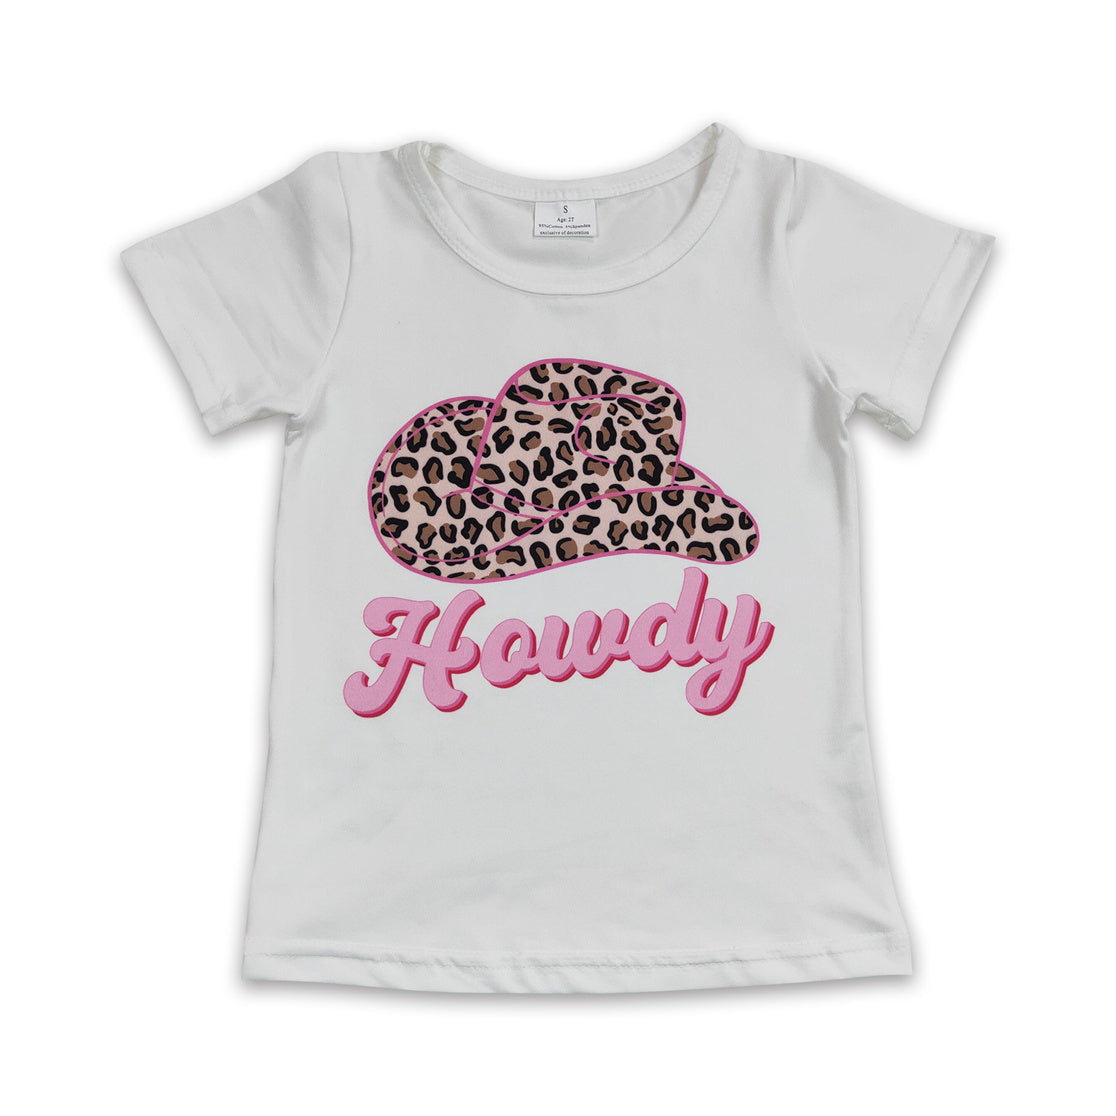 GT0138 kids clothes howdy hat summer tshirt